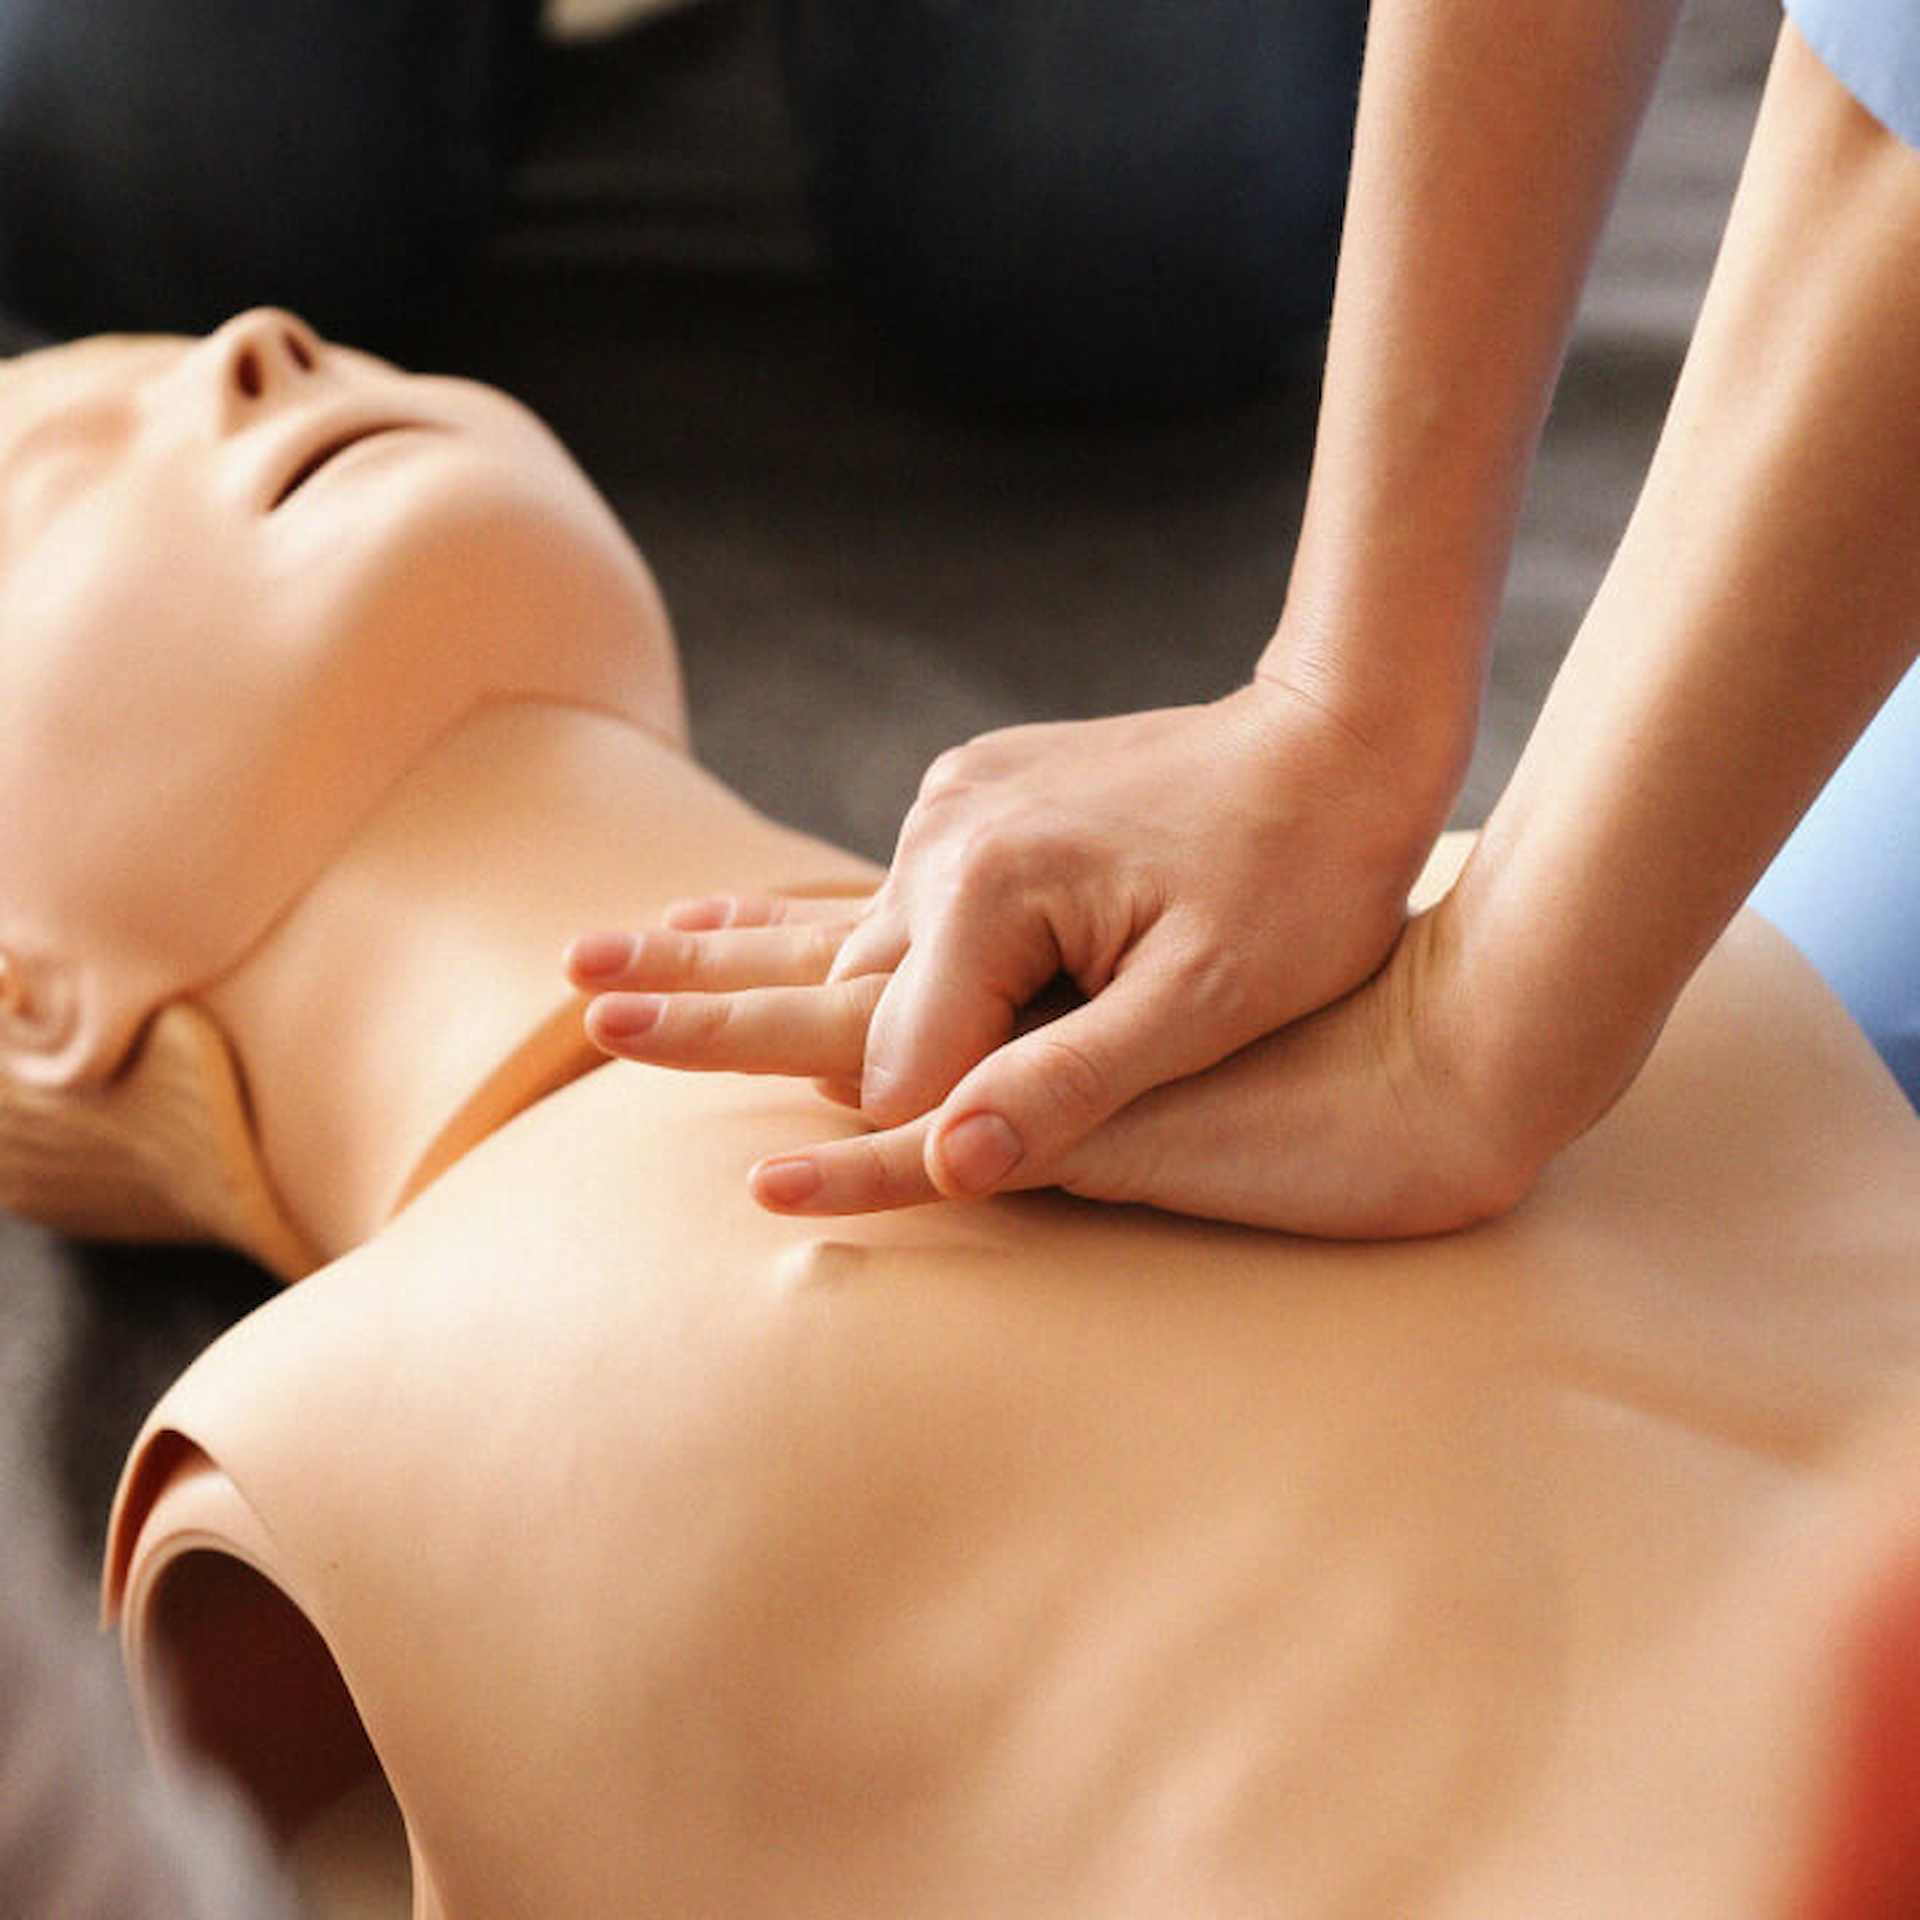 CPR dummy being tested on